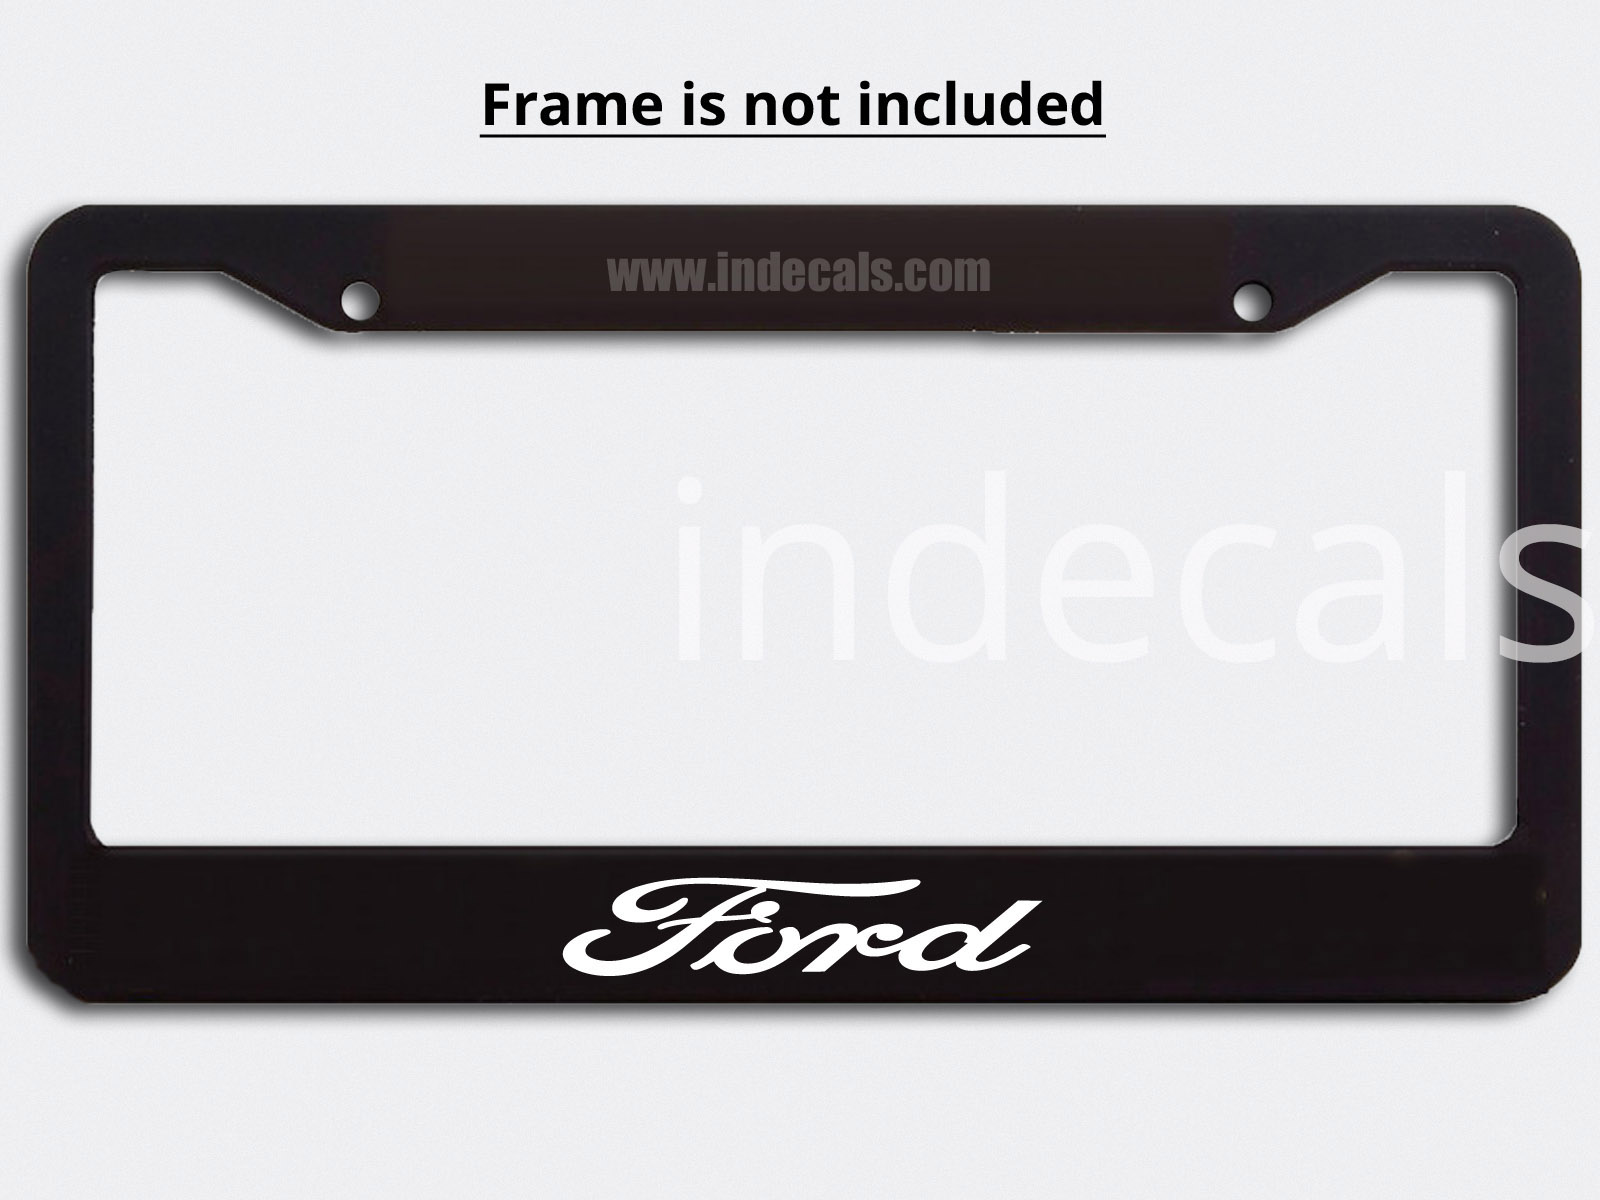 3 x Ford Stickers for Plate Frame - White